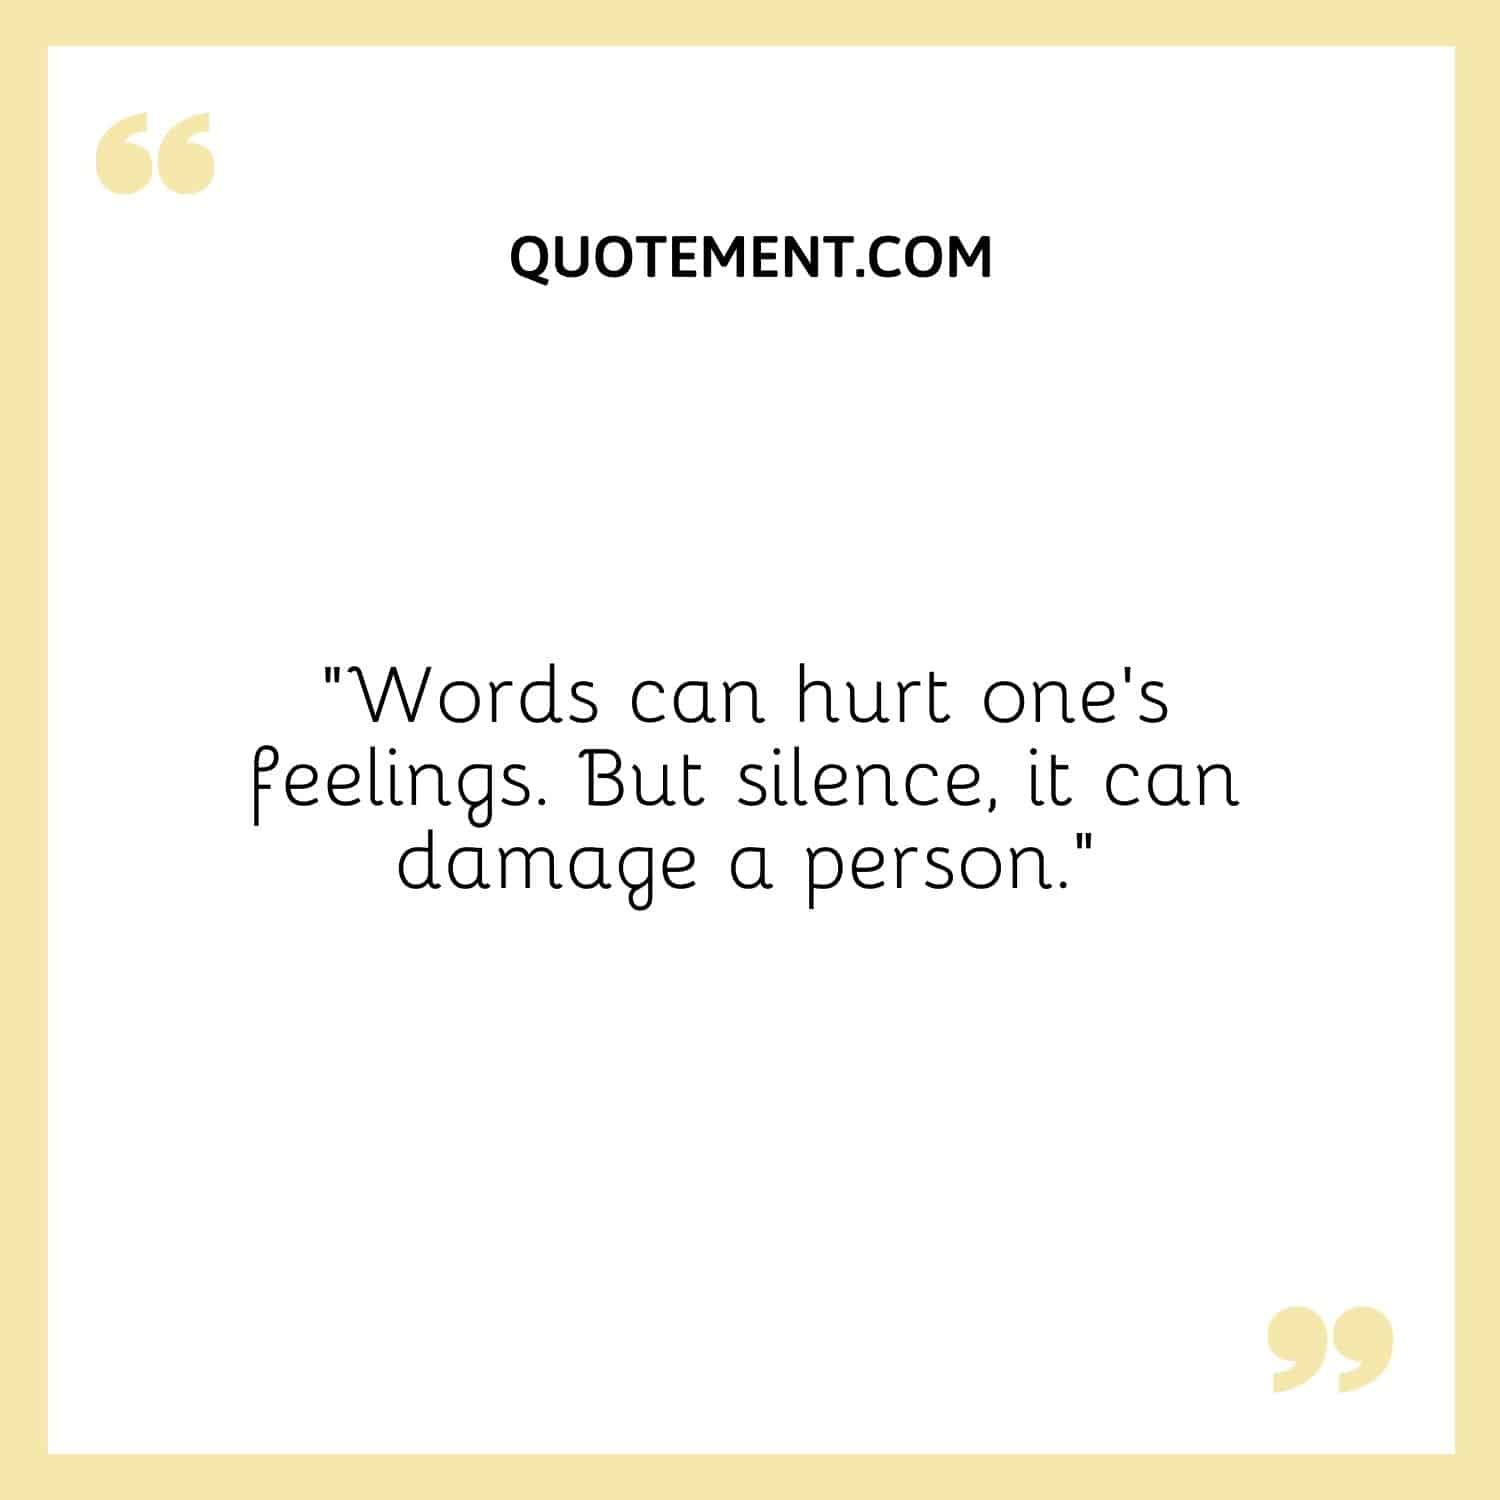 “Words can hurt one’s feelings. But silence, it can damage a person.”